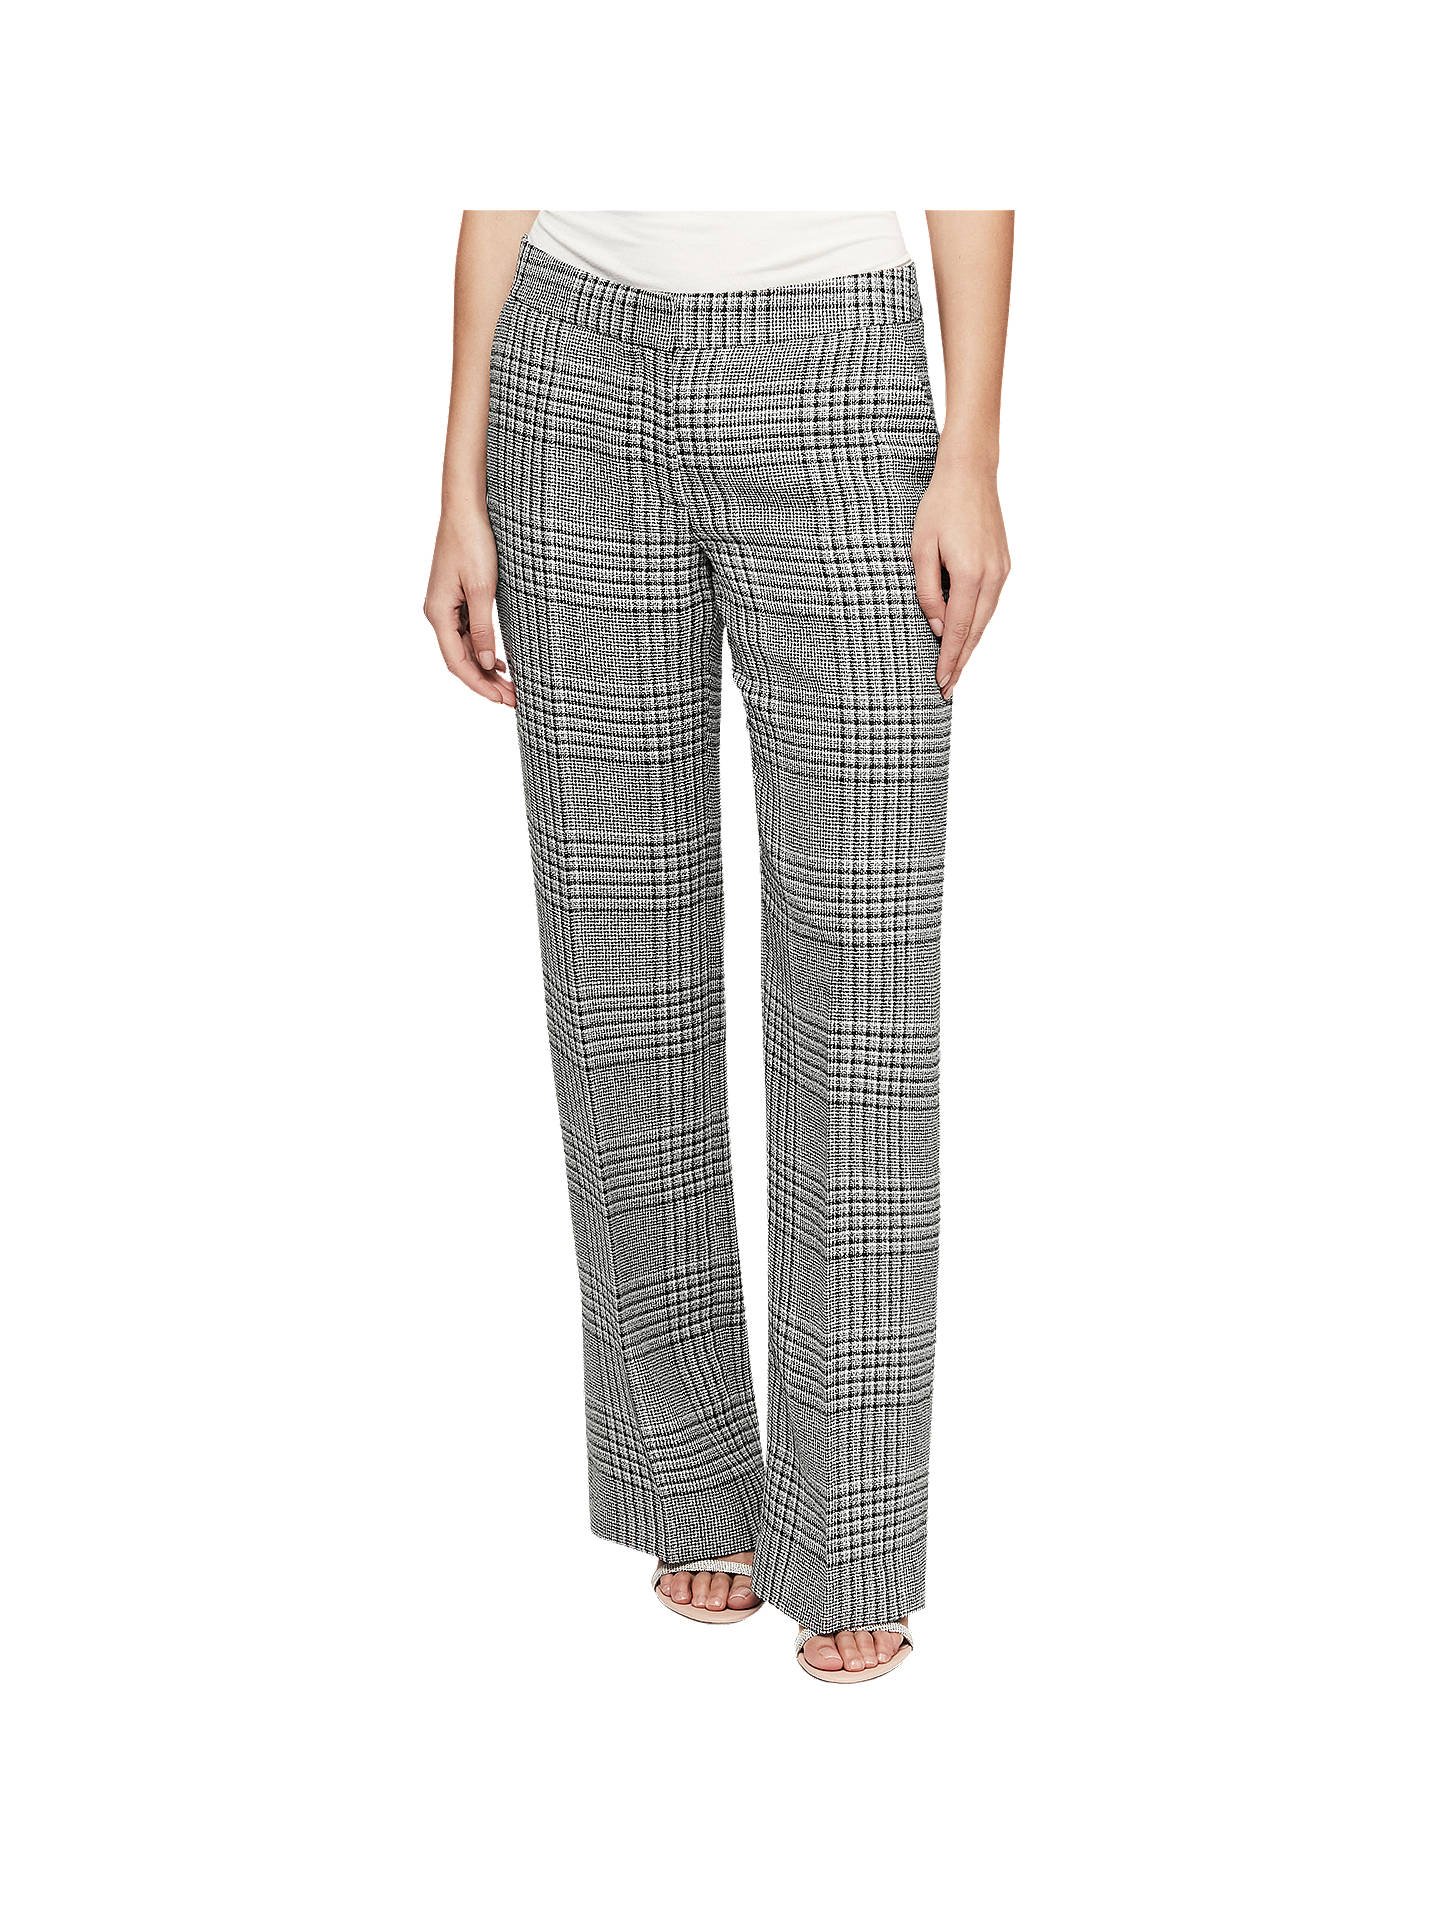 Reiss Phia Wide Leg Check Trousers, Off White at John Lewis & Partners